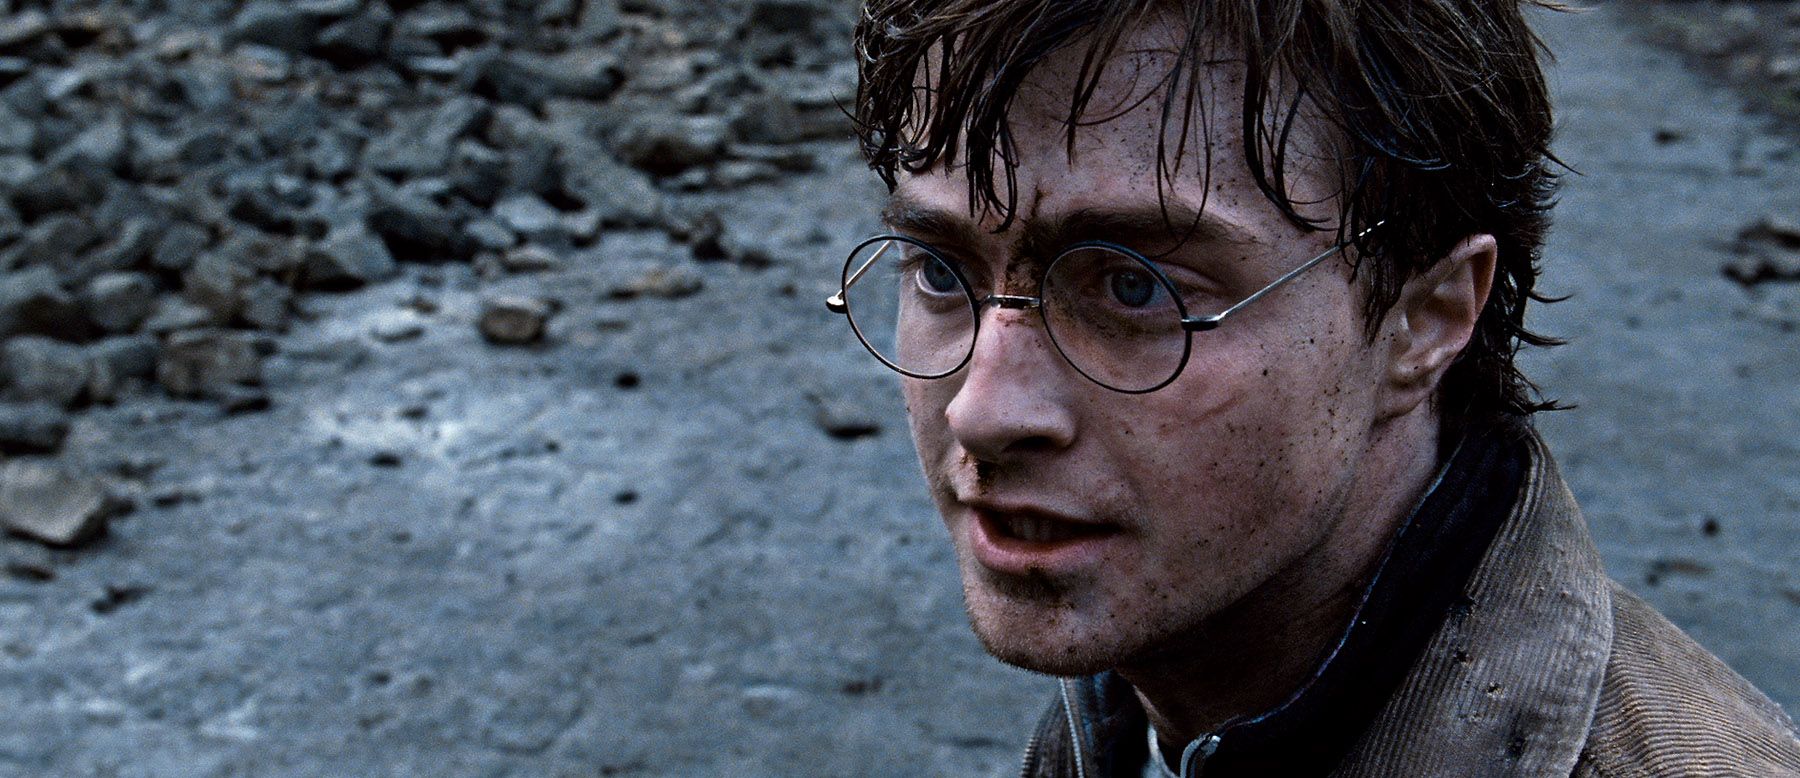 Harry Potter and the Deathly Hallows Photo #4